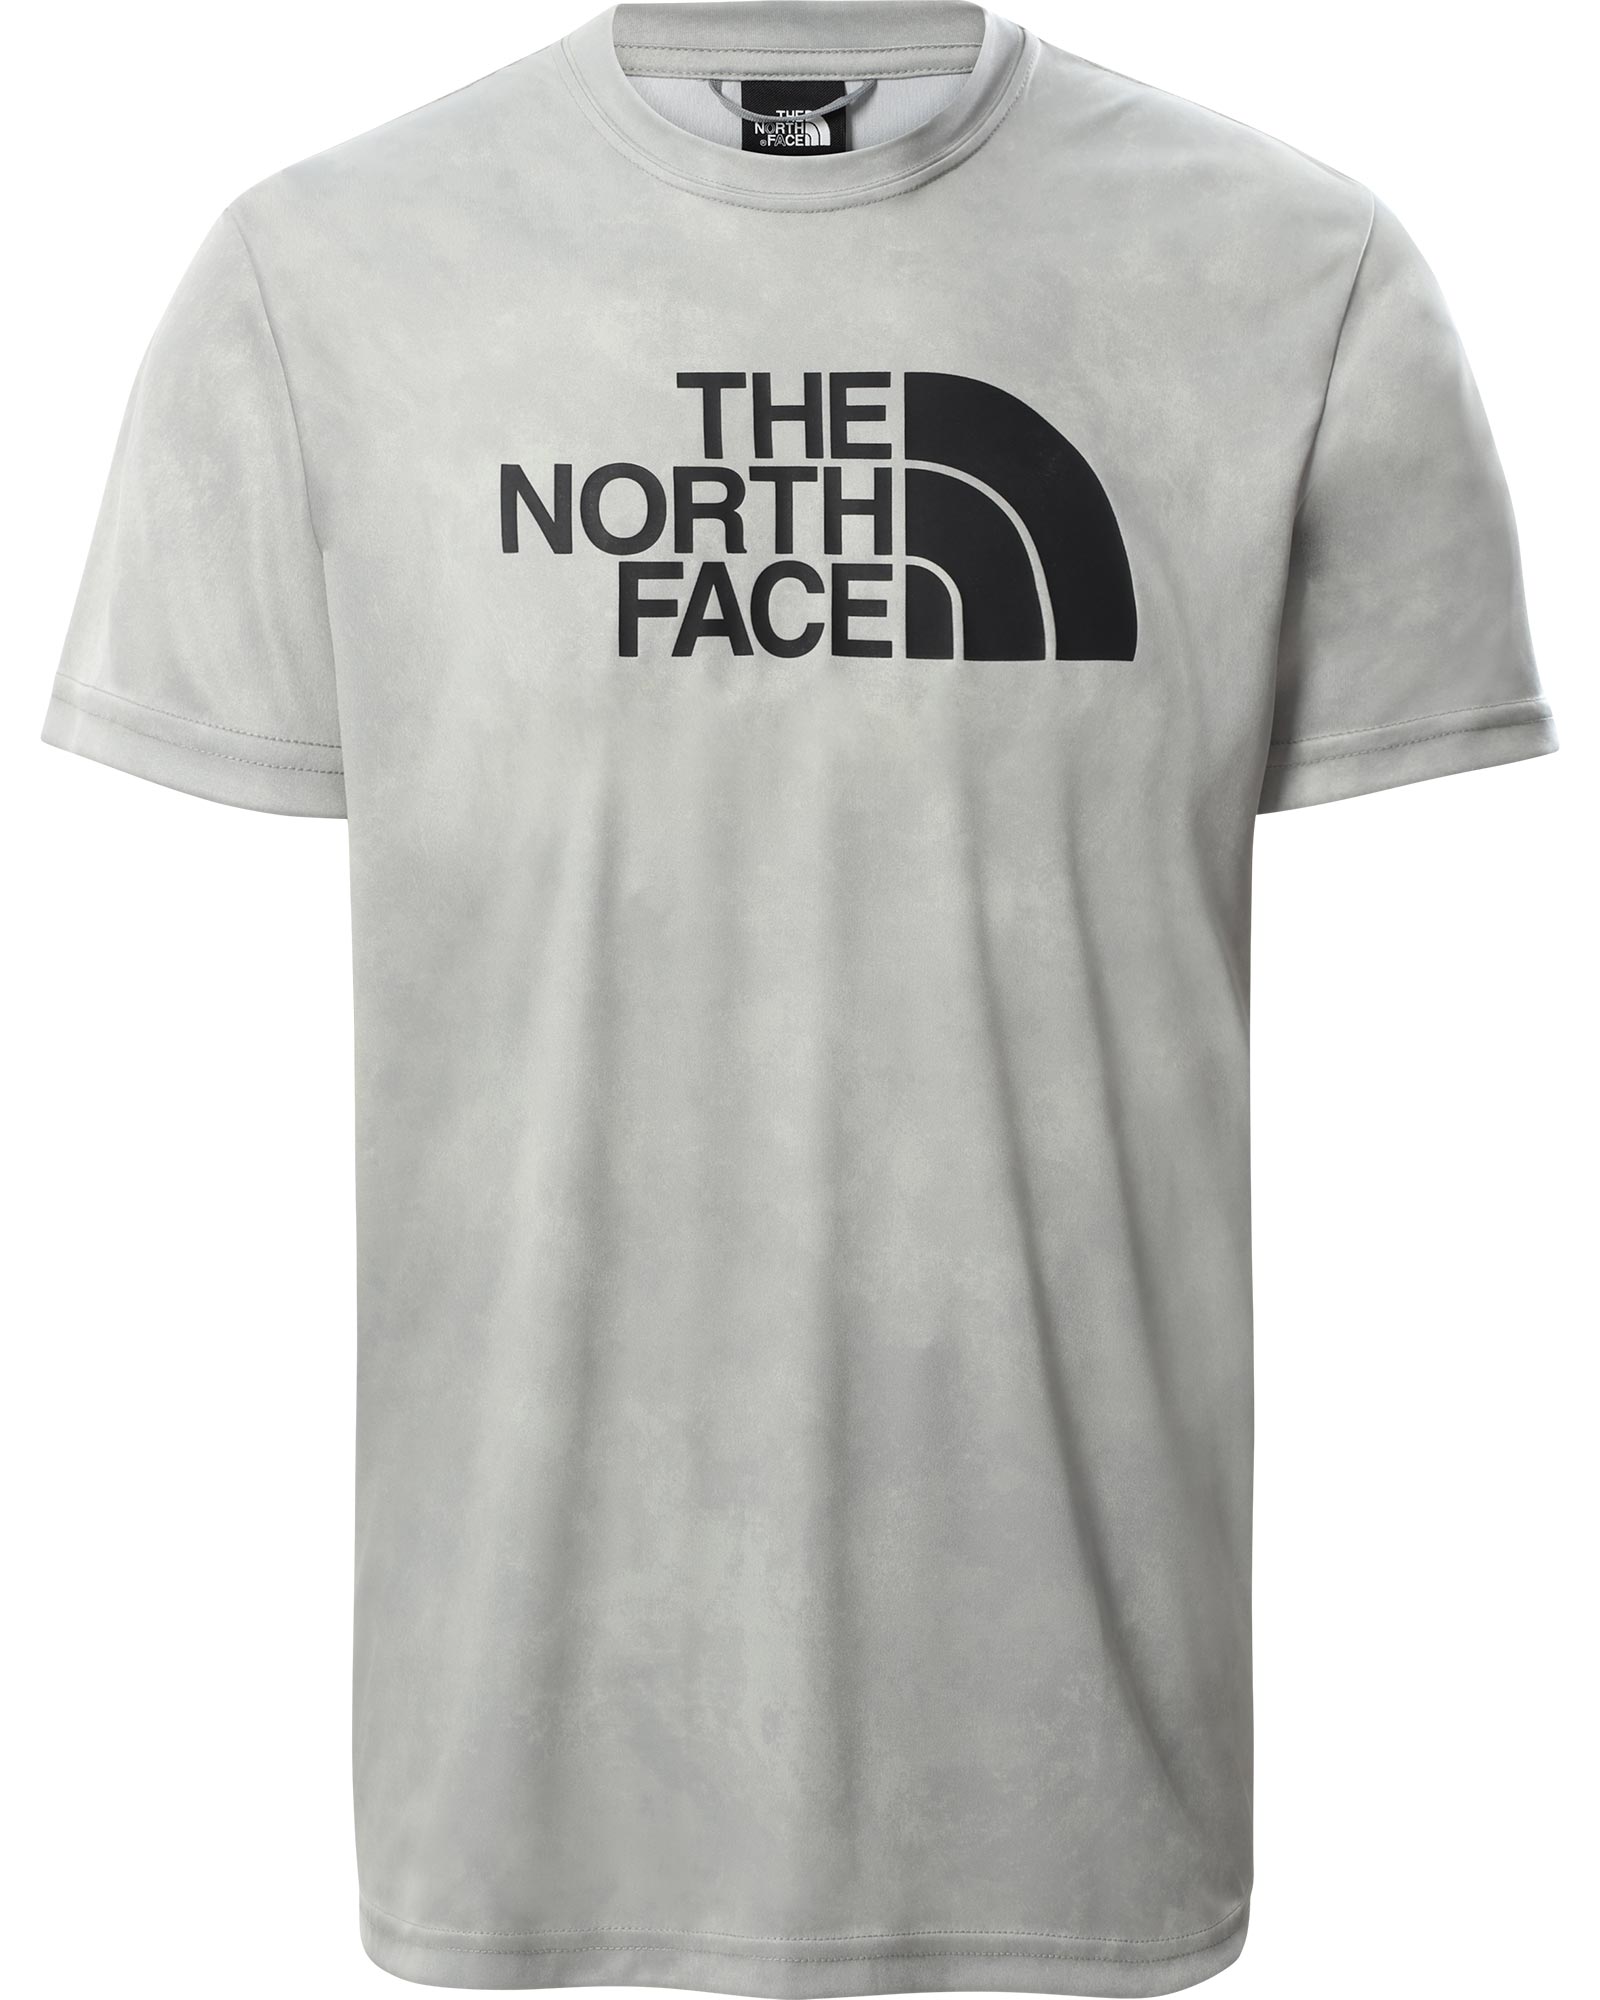 The North Face Reaxion Easy Men’s T Shirt - Mid Grey Heather S